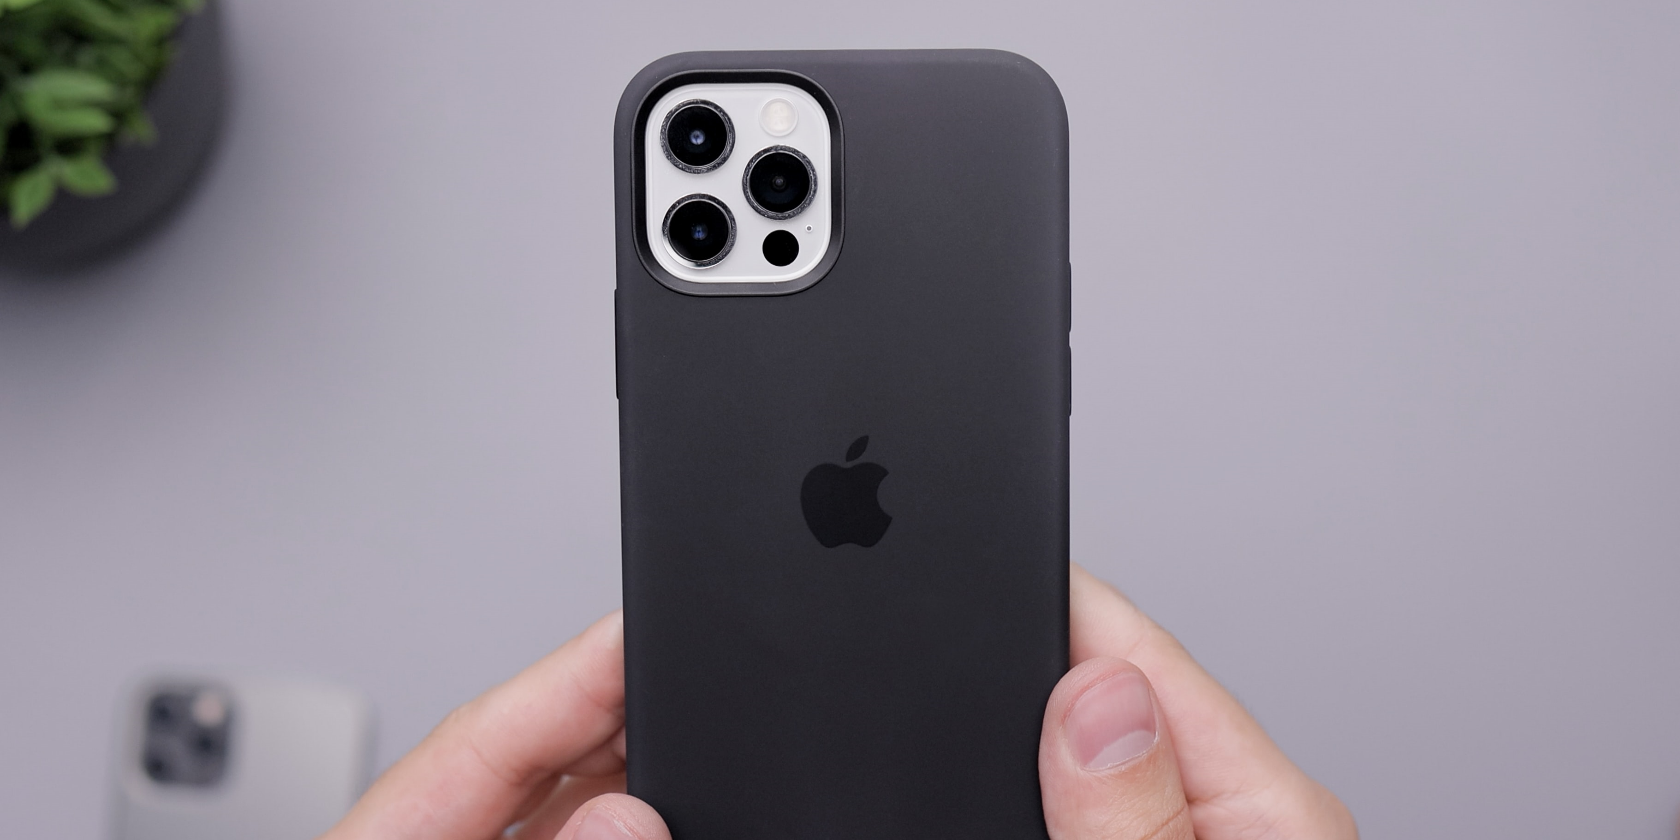 iphone 13 pro max case in black with hands holding the phone